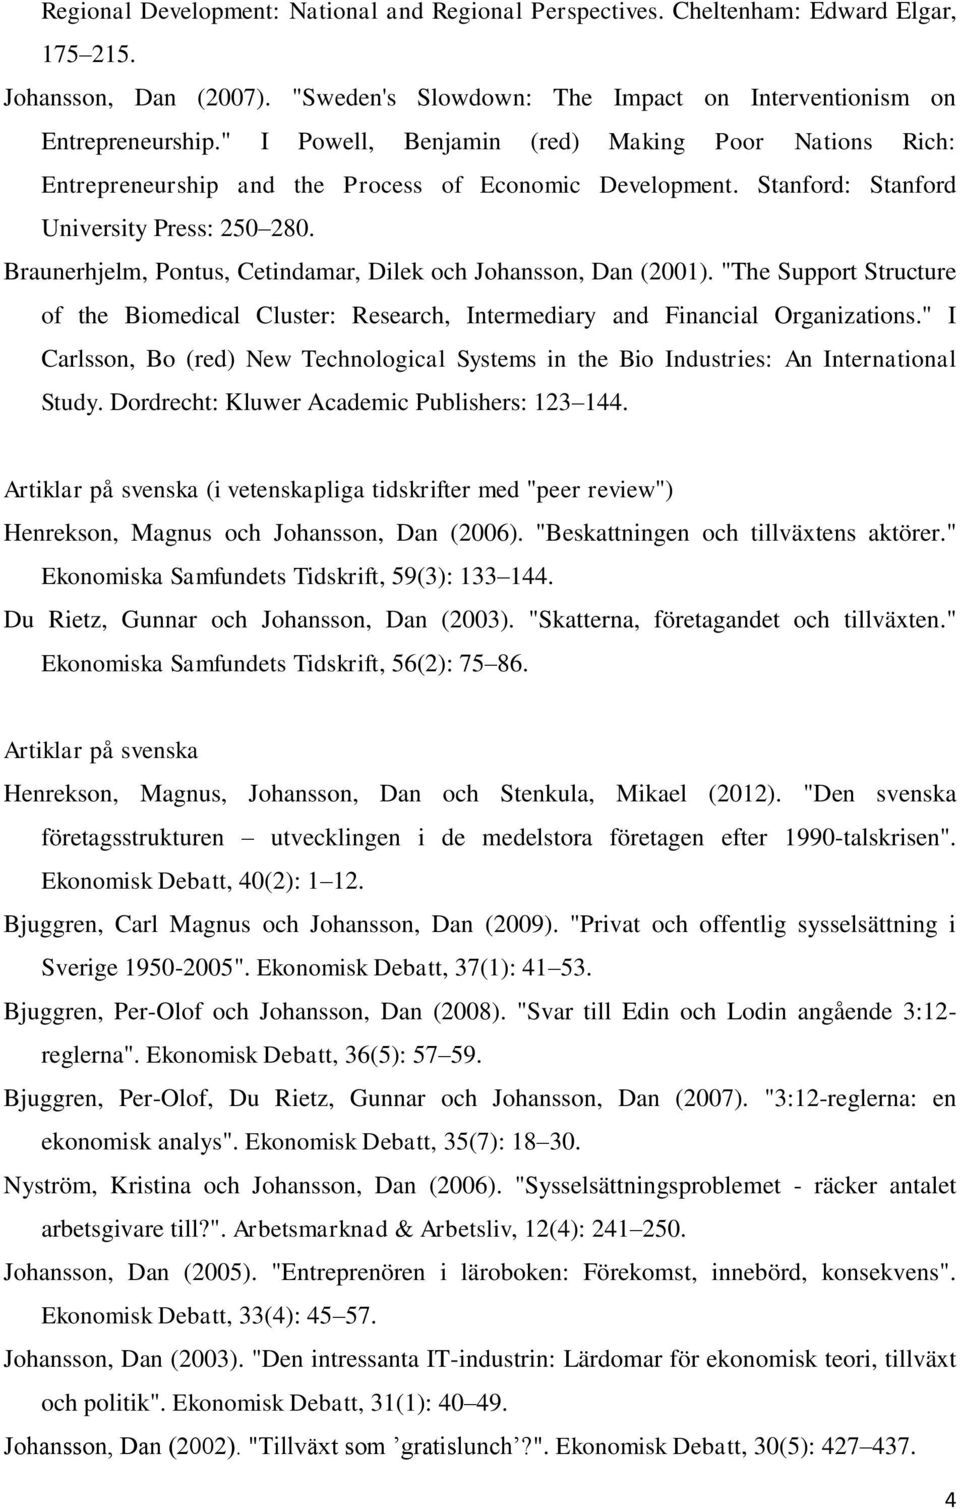 Braunerhjelm, Pontus, Cetindamar, Dilek och Johansson, Dan (2001). "The Support Structure of the Biomedical Cluster: Research, Intermediary and Financial Organizations.